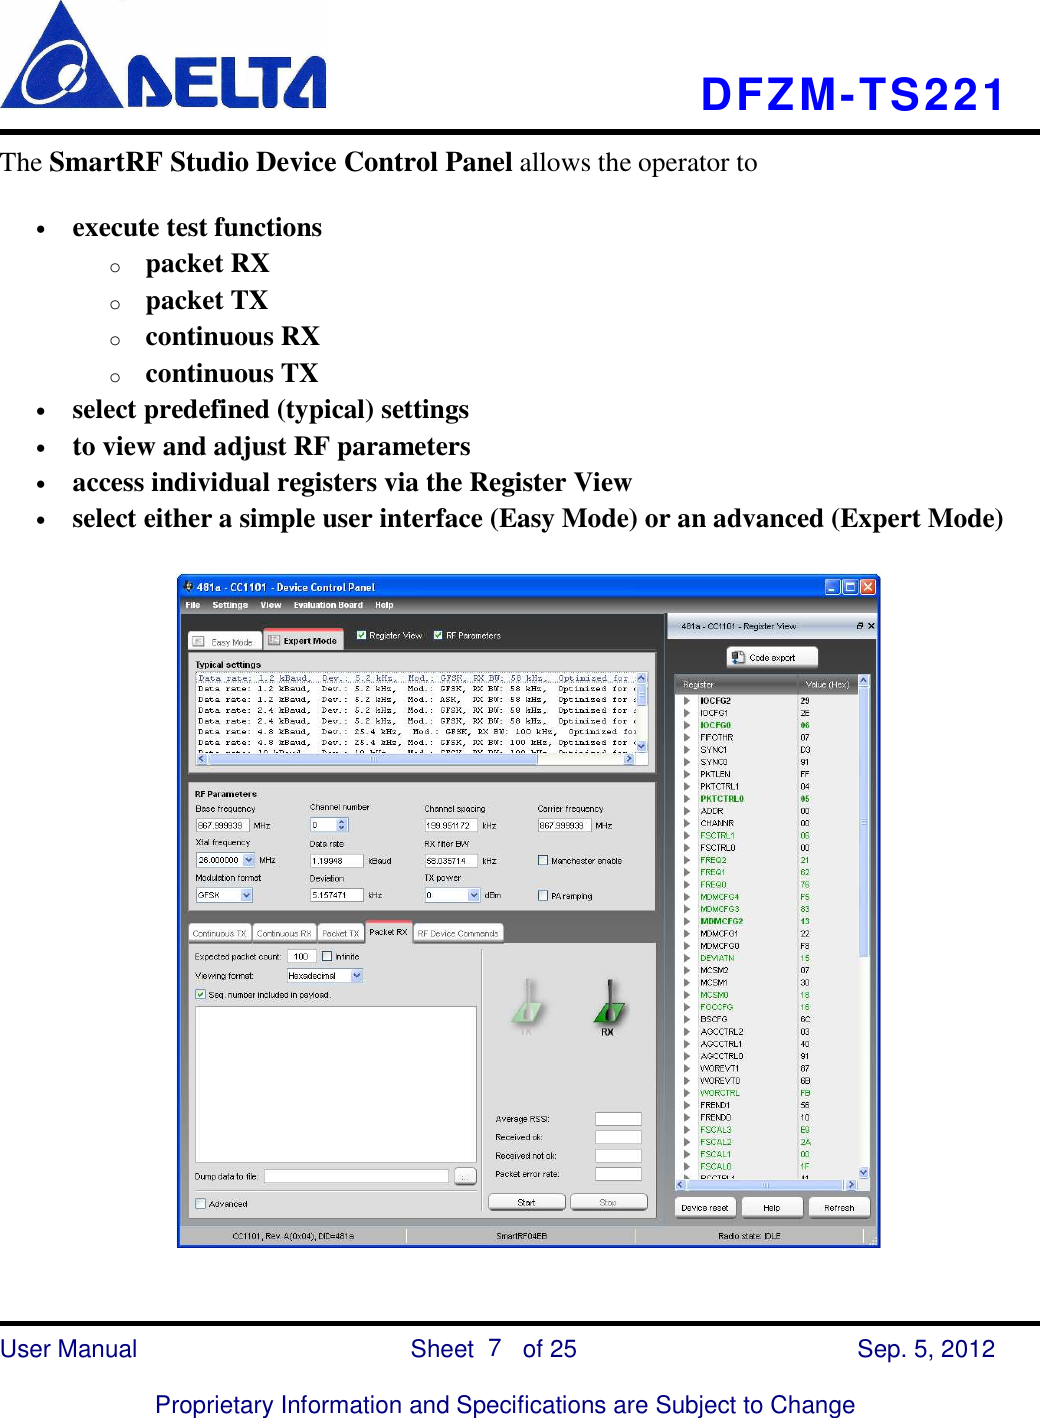    DFZM-TS221    User Manual                            Sheet        of 25      Sep. 5, 2012  Proprietary Information and Specifications are Subject to Change 7 The SmartRF Studio Device Control Panel allows the operator to • execute test functions o packet RX o packet TX o continuous RX o continuous TX • select predefined (typical) settings • to view and adjust RF parameters • access individual registers via the Register View • select either a simple user interface (Easy Mode) or an advanced (Expert Mode)  